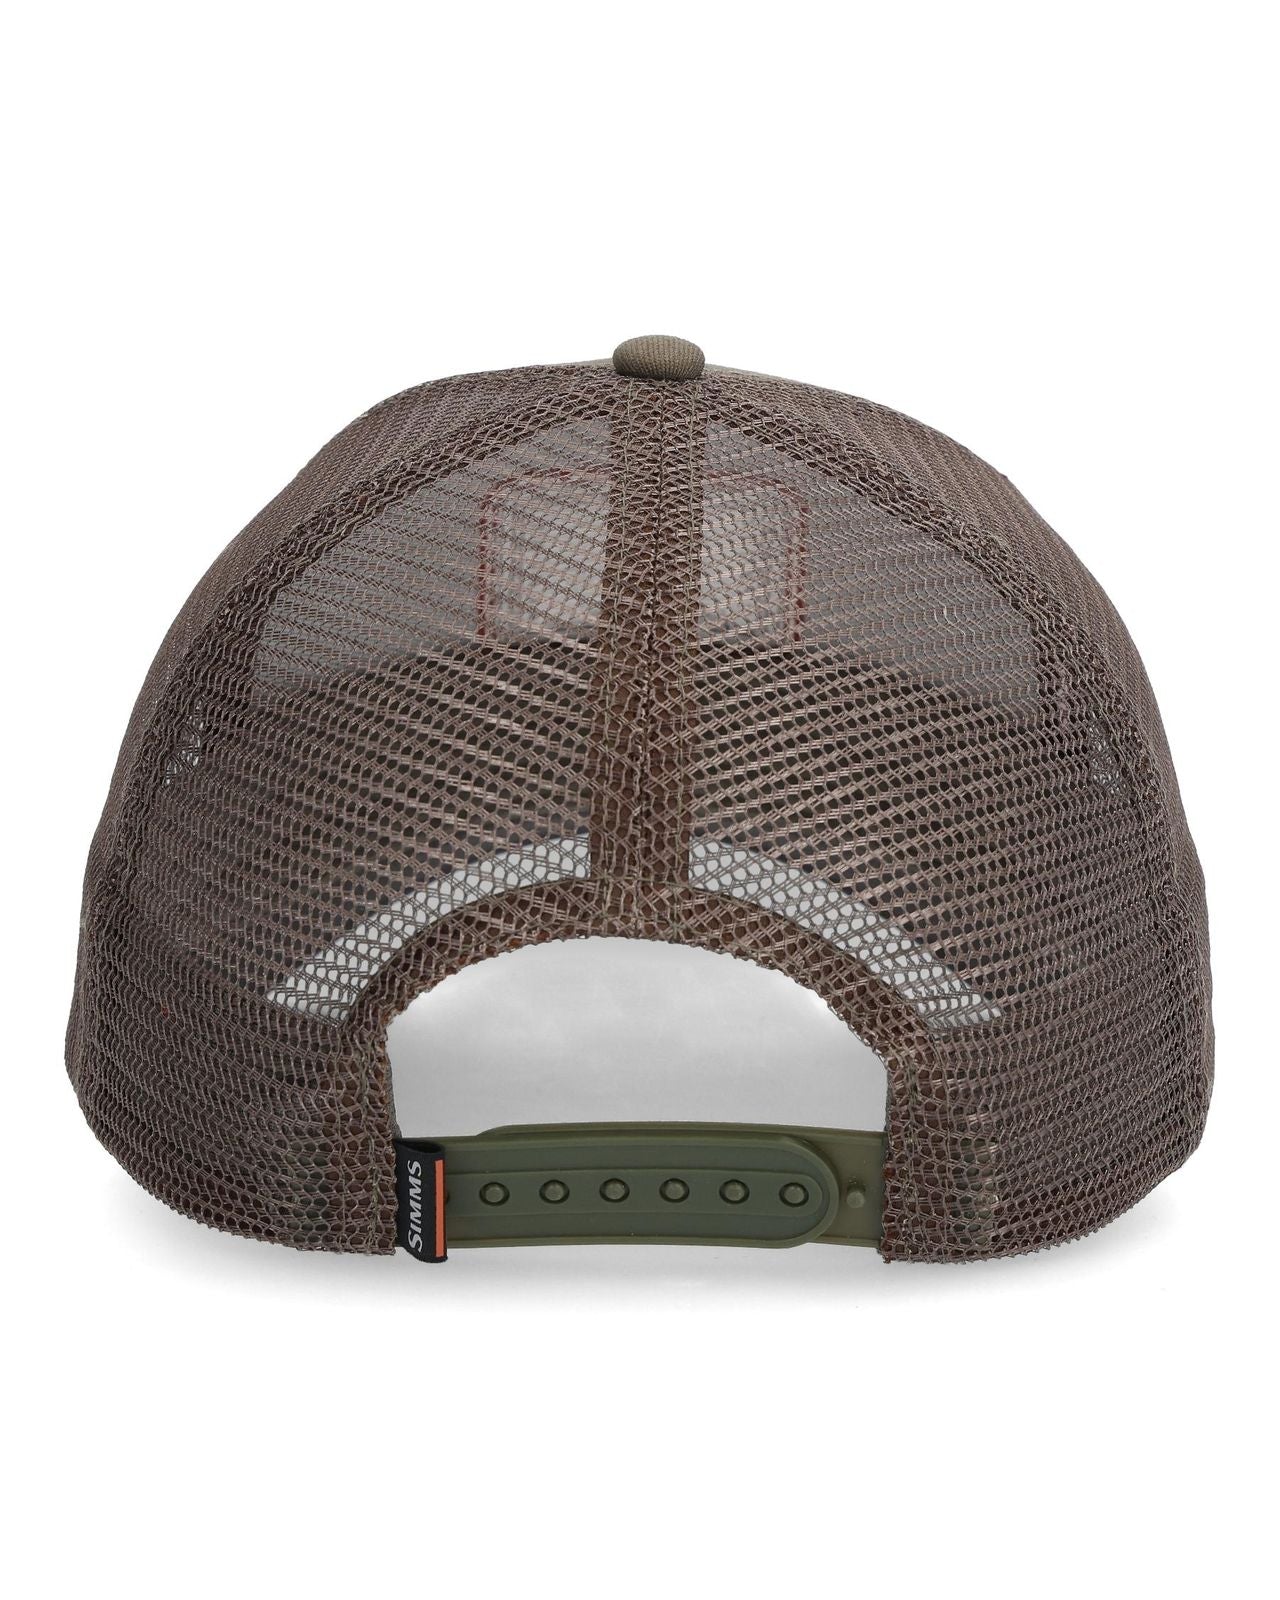 SIMMS TROUT ICON TRUCKER CAP HICKORY